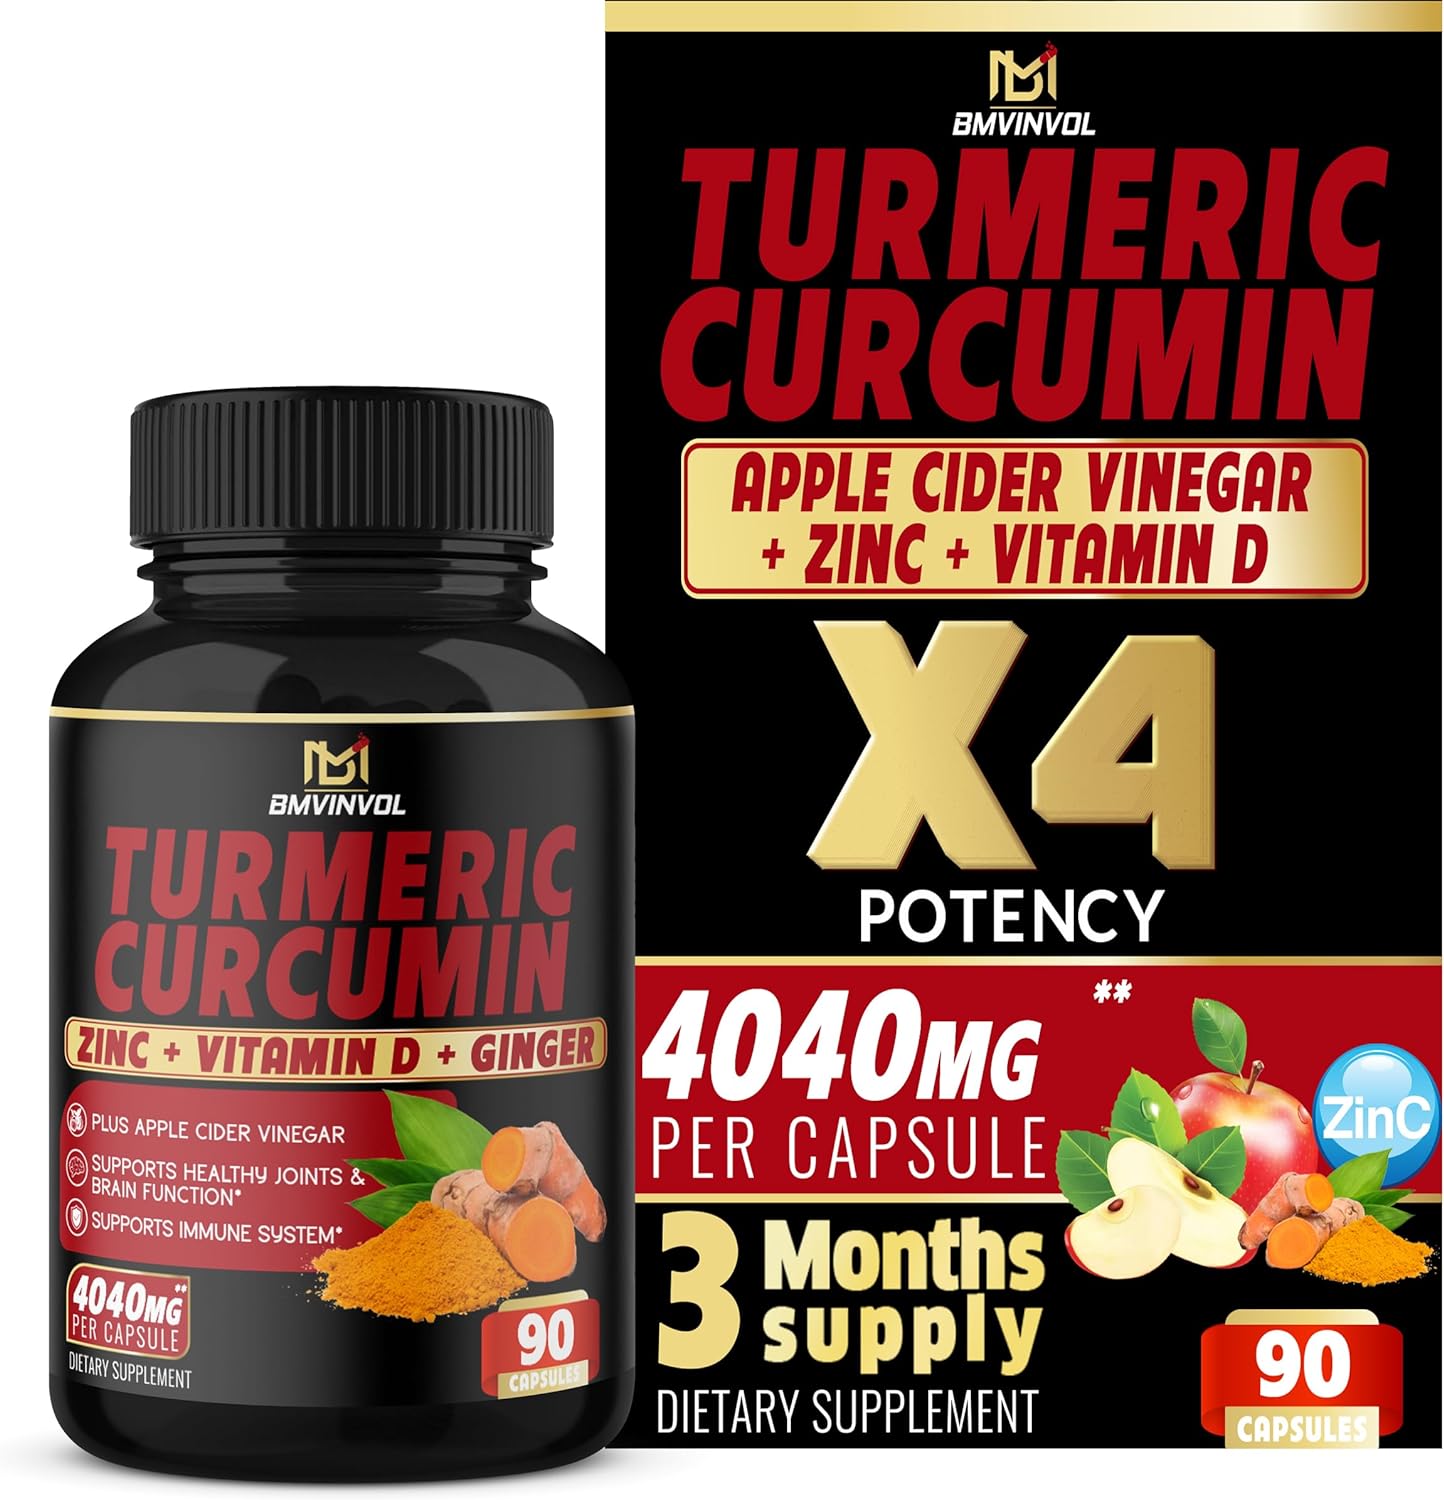 BMVINVOL Turmeric Curcumin Supplement 4040 mg - 95% Curcuminoids with Ginger, Apple Cider Vinegar, Black Pepper - Supports Joint, Antioxidant & Immune System - 3 Month Supply